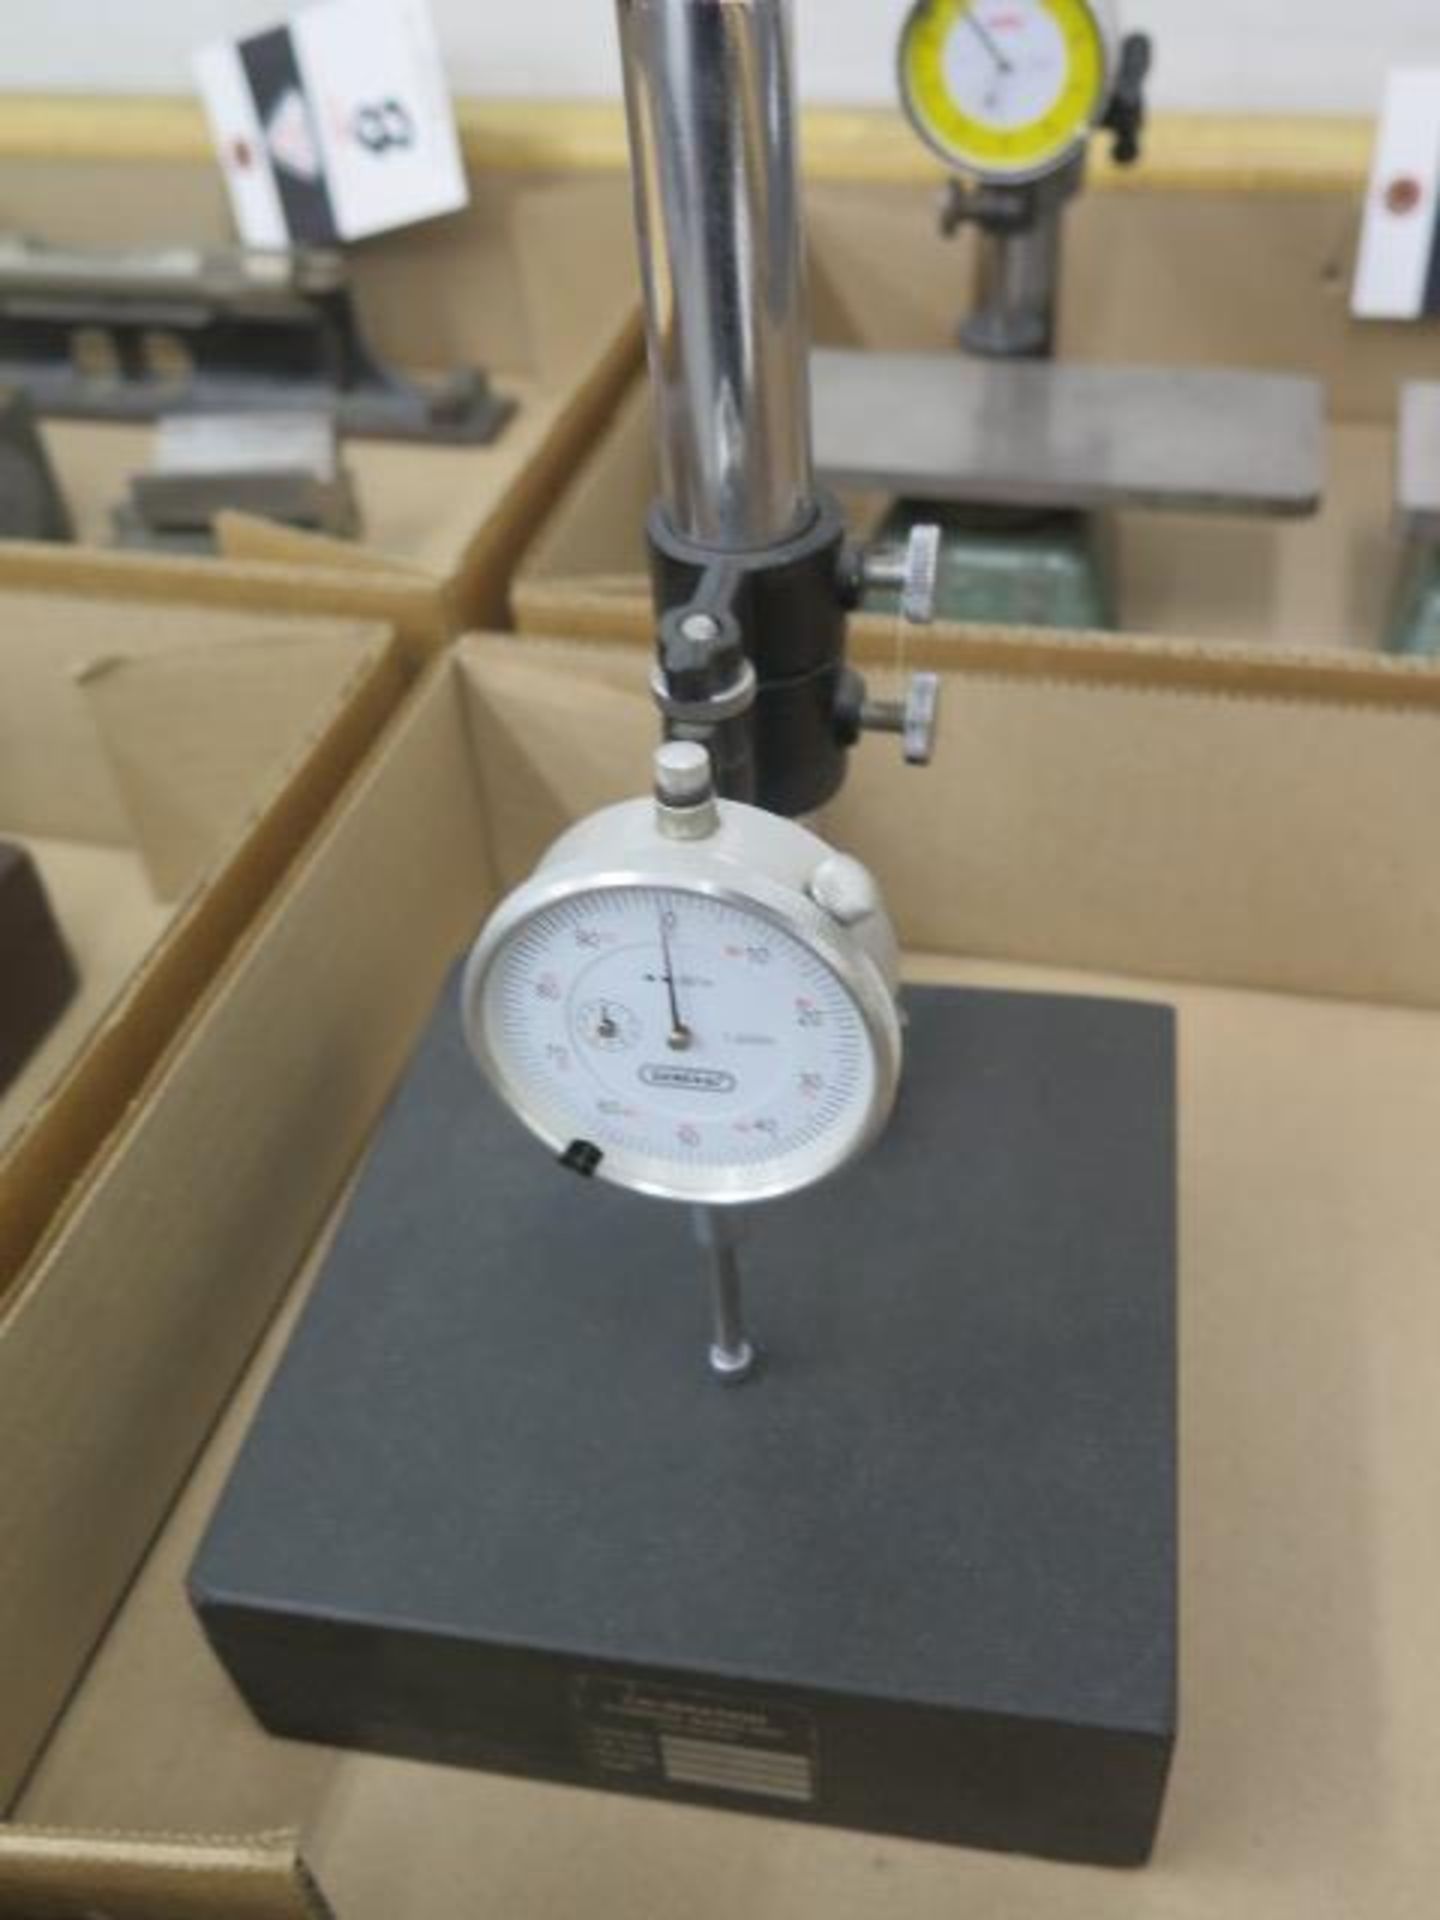 6" x 6" Granite Indicator Stand w/ Dial Indicator (SOLD AS-IS - NO WARRANTY) - Image 2 of 3